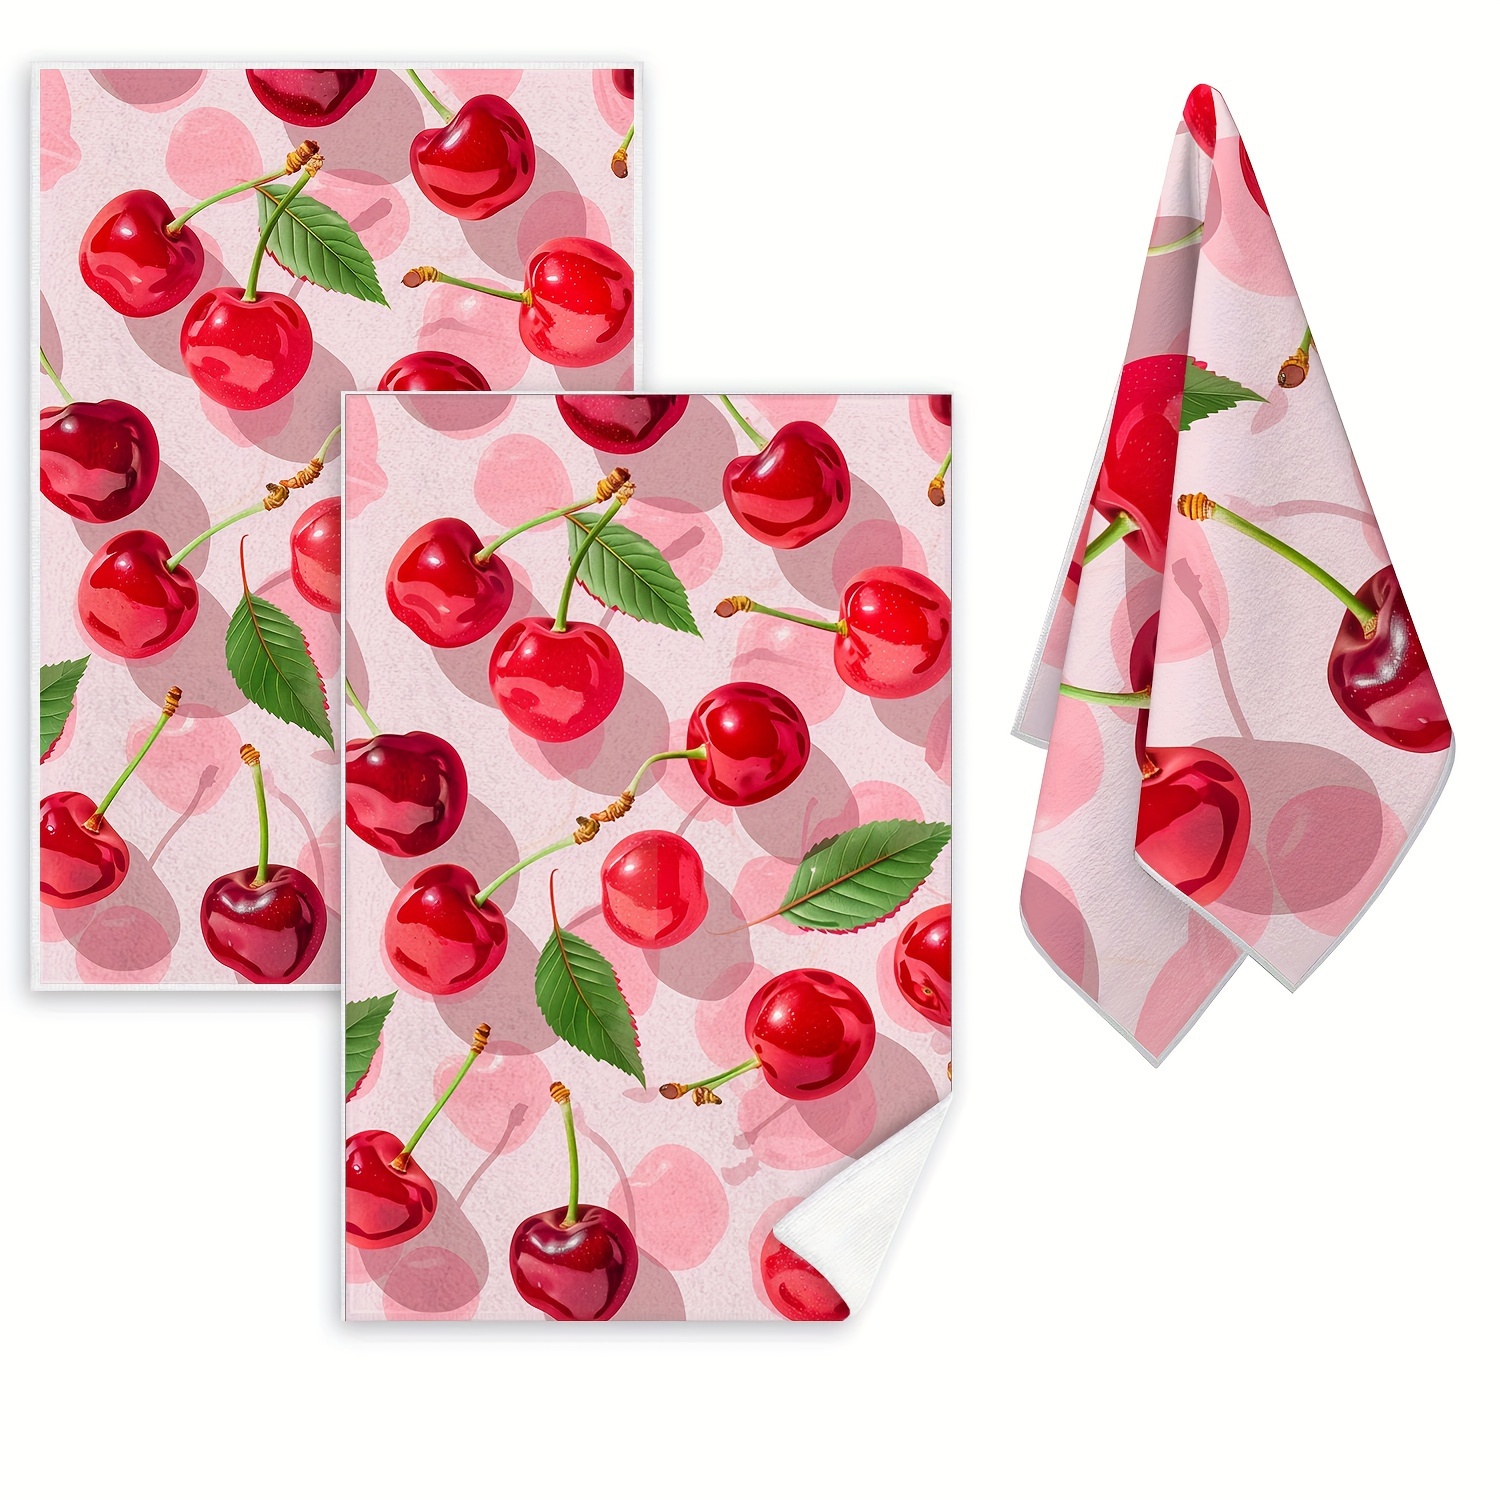 

2-pack Ultra-soft Microfiber Bath Towels - Red Cherry Design, Absorbent & Decorative Kitchen And Bathroom Towels, Perfect For Cooking, Baking, Housewarming Gifts